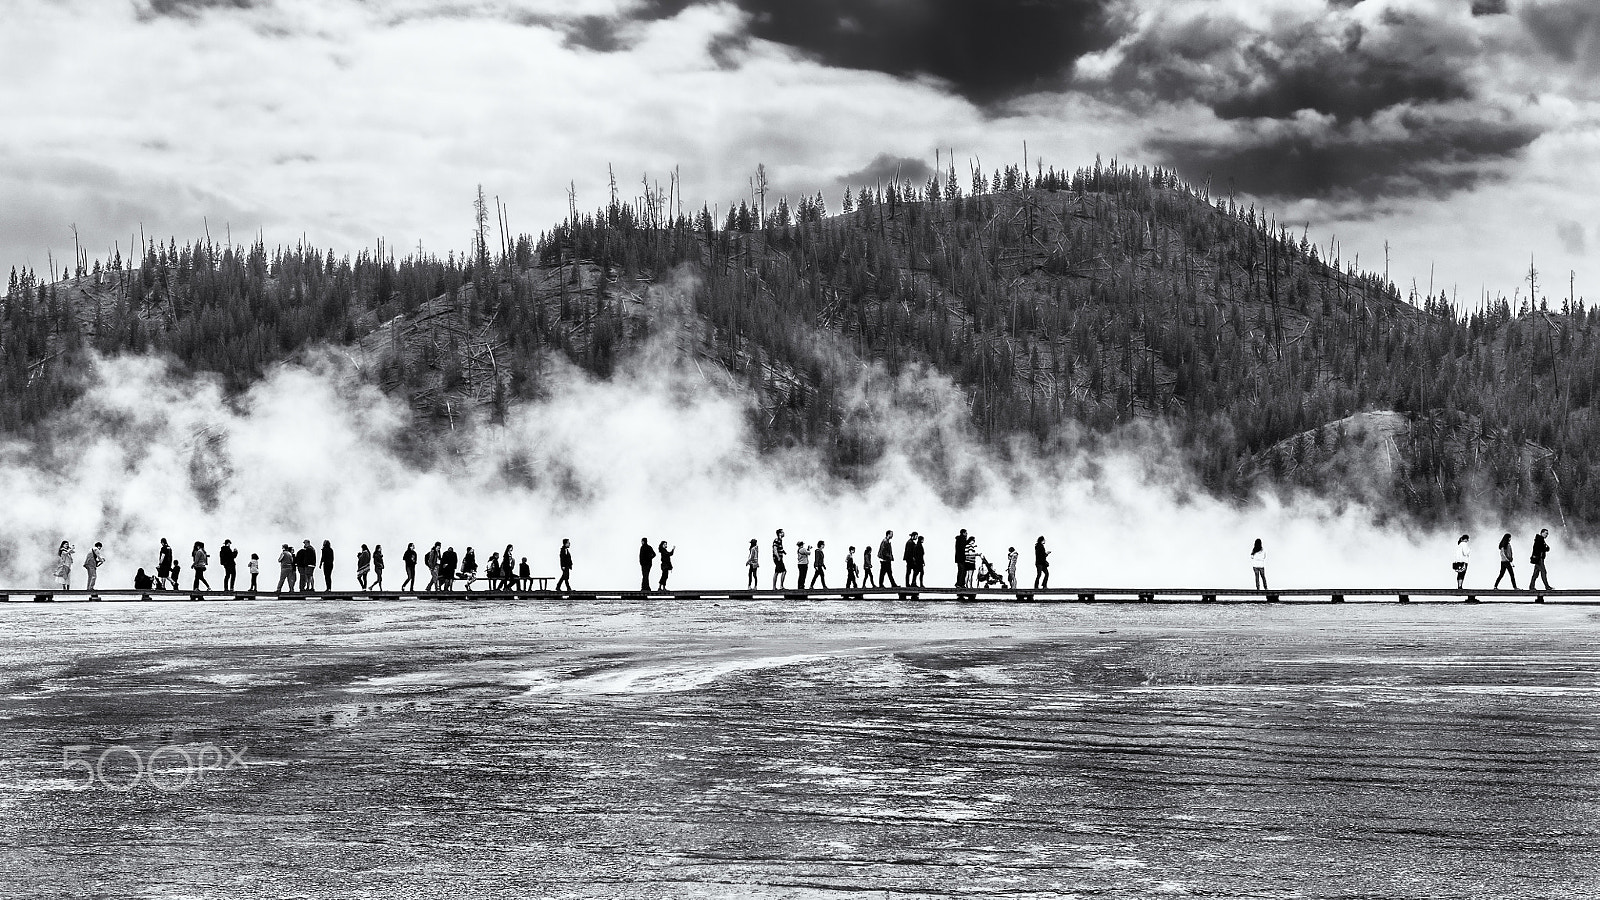 Samsung/Schneider D-XENON 12-24mm F4 ED AL [IF] sample photo. People in yellowstone photography